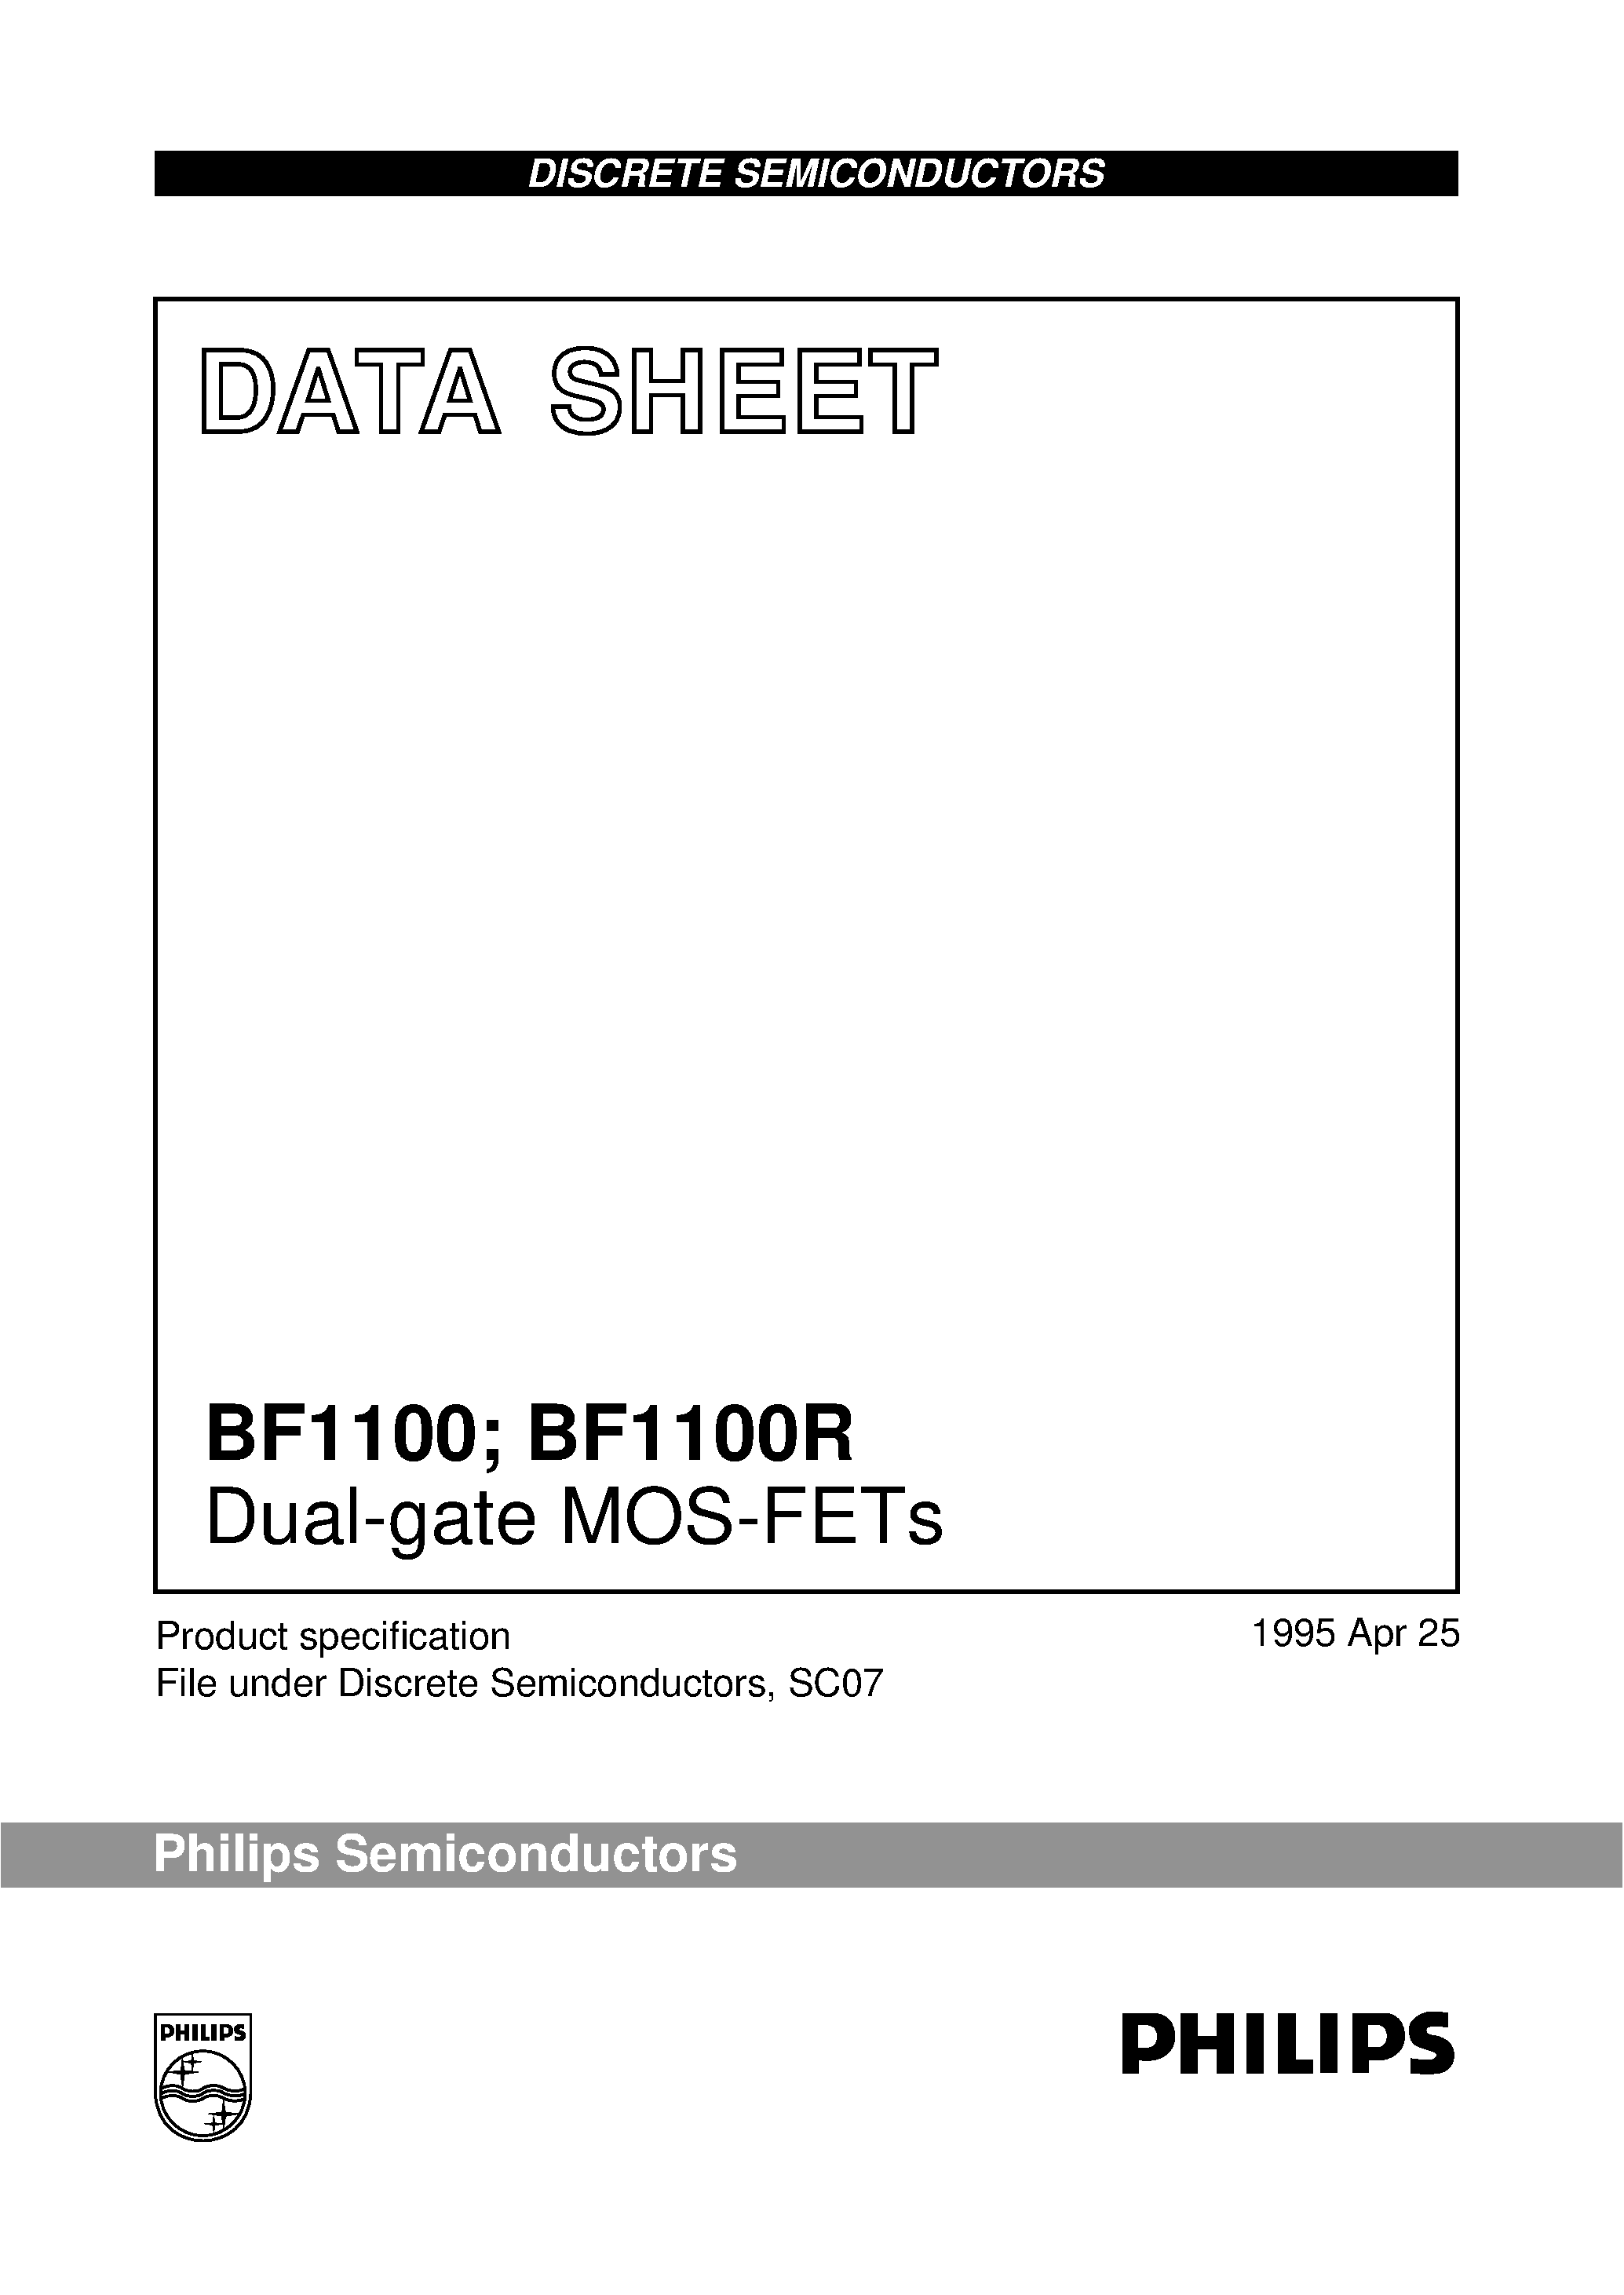 Datasheet BF1100 - Dual-gate MOS-FETs page 1